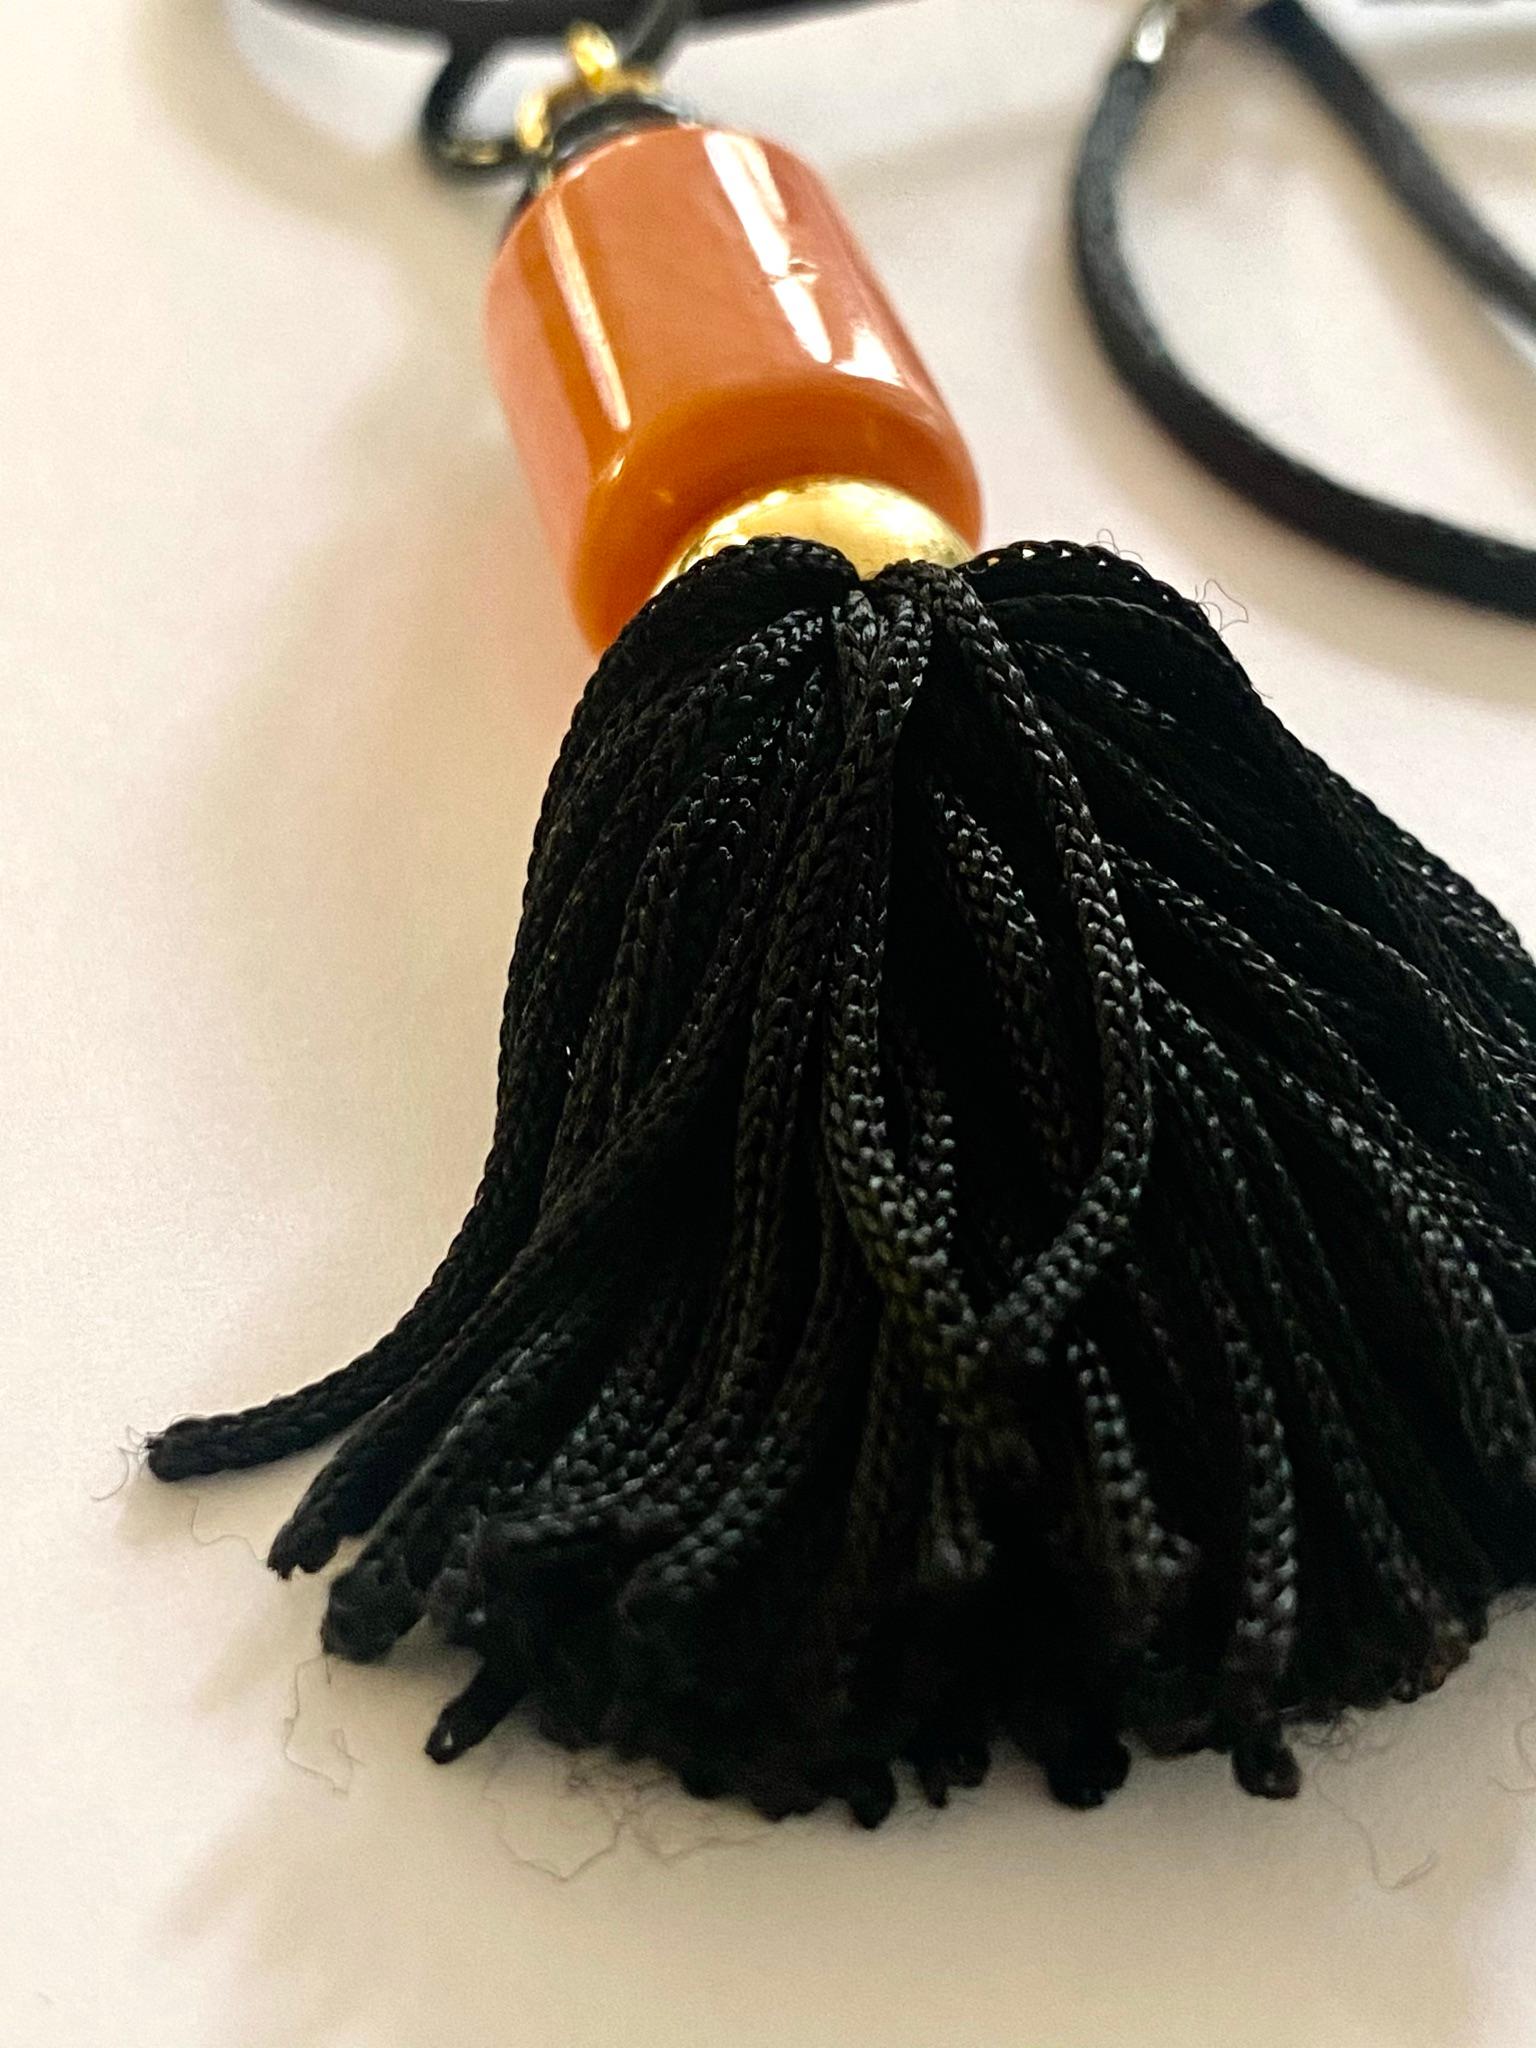 An 18K. yellow gold, red coral with onyx and yellow gold pendant, with a black silk tassel.
Made in Italy - Naples by Loffredo.
Weight: 15.00 grams
size pendant: 85 x 14 mm
size red coral: 14 x 17 mm (Coralium Librium)
Black silk coolier with a